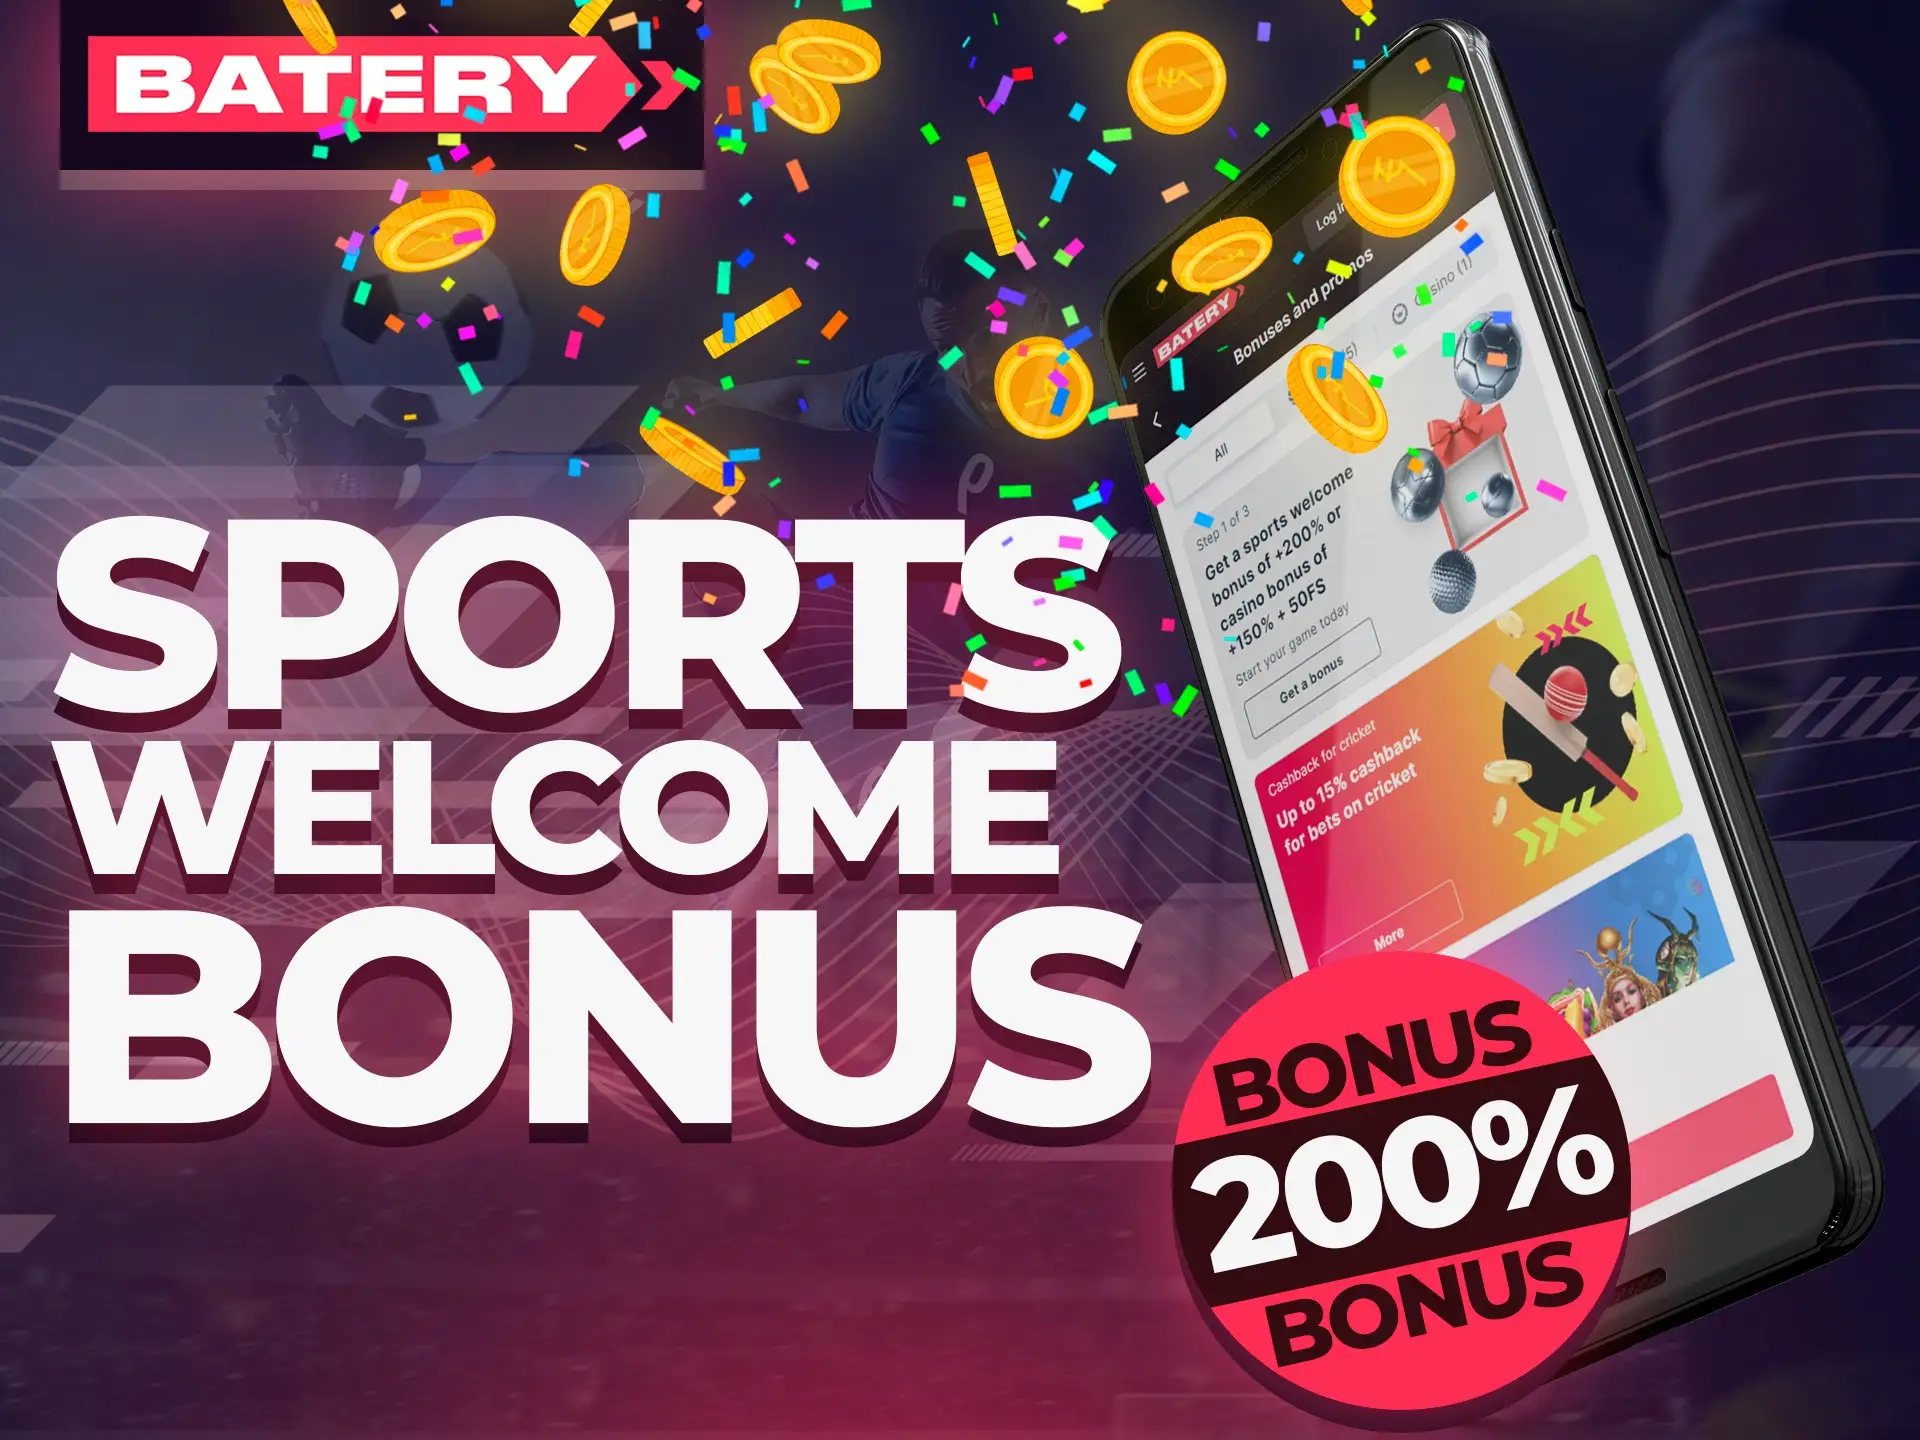 Bet on sports at Batery and get your bonus.